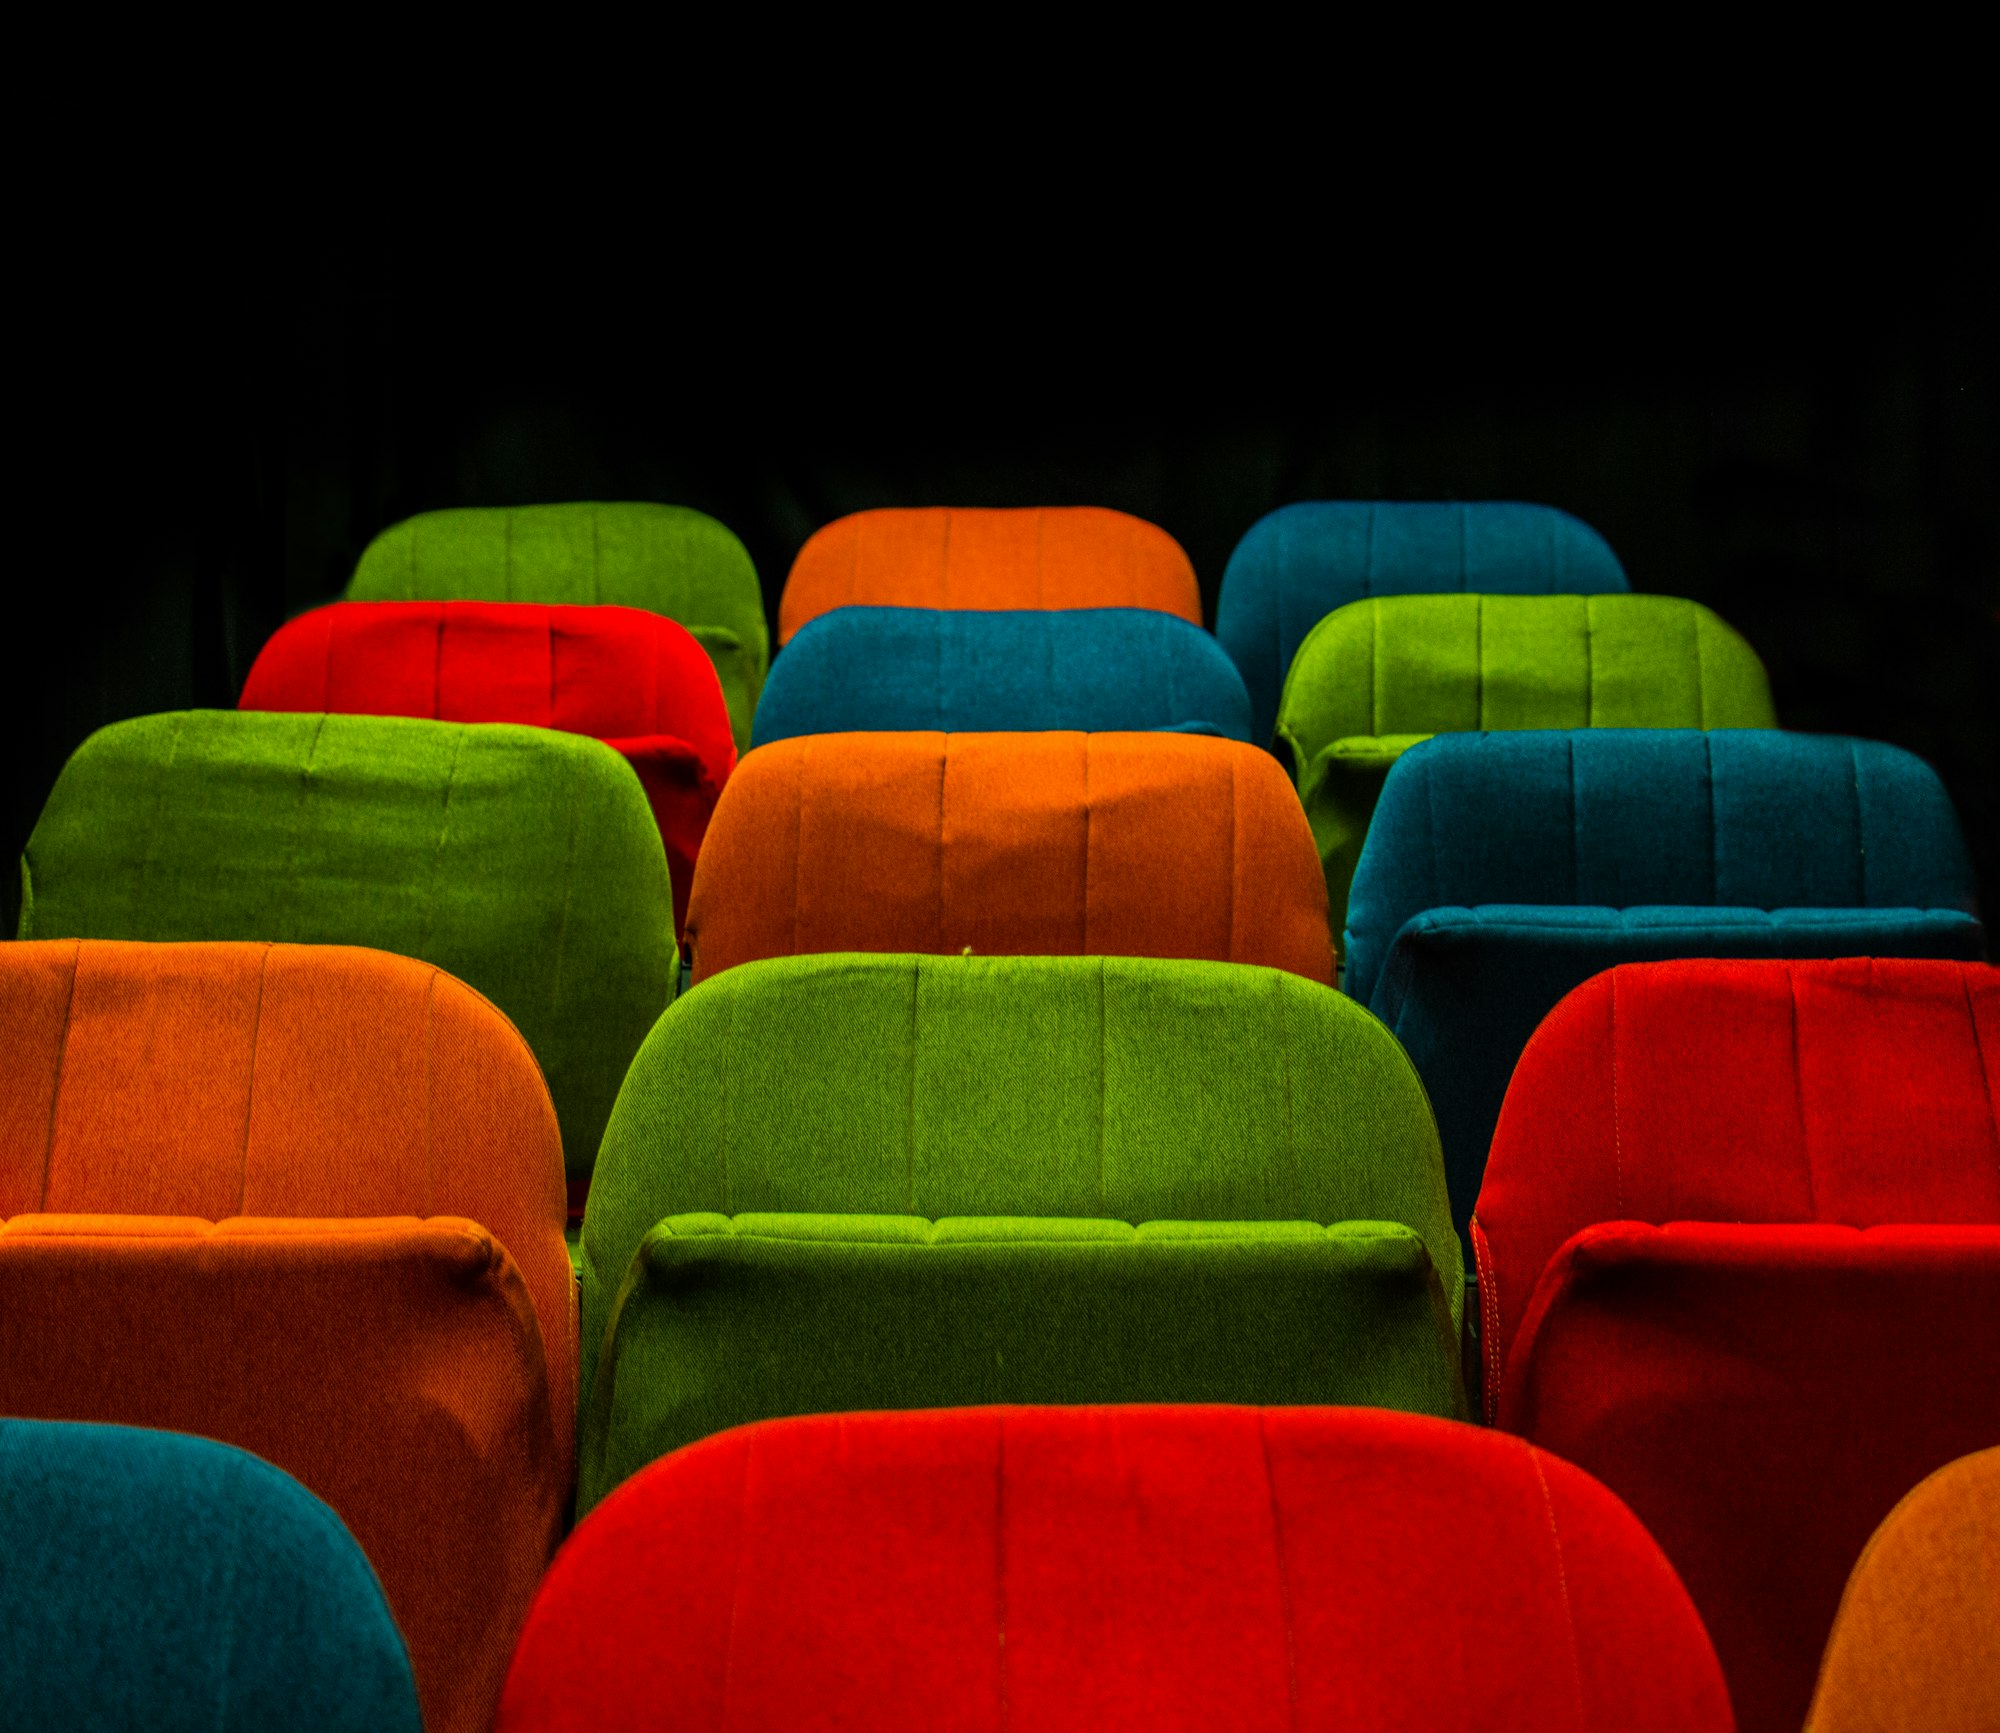 Search Movement, Viral PR and SEO, Amazon Theaters